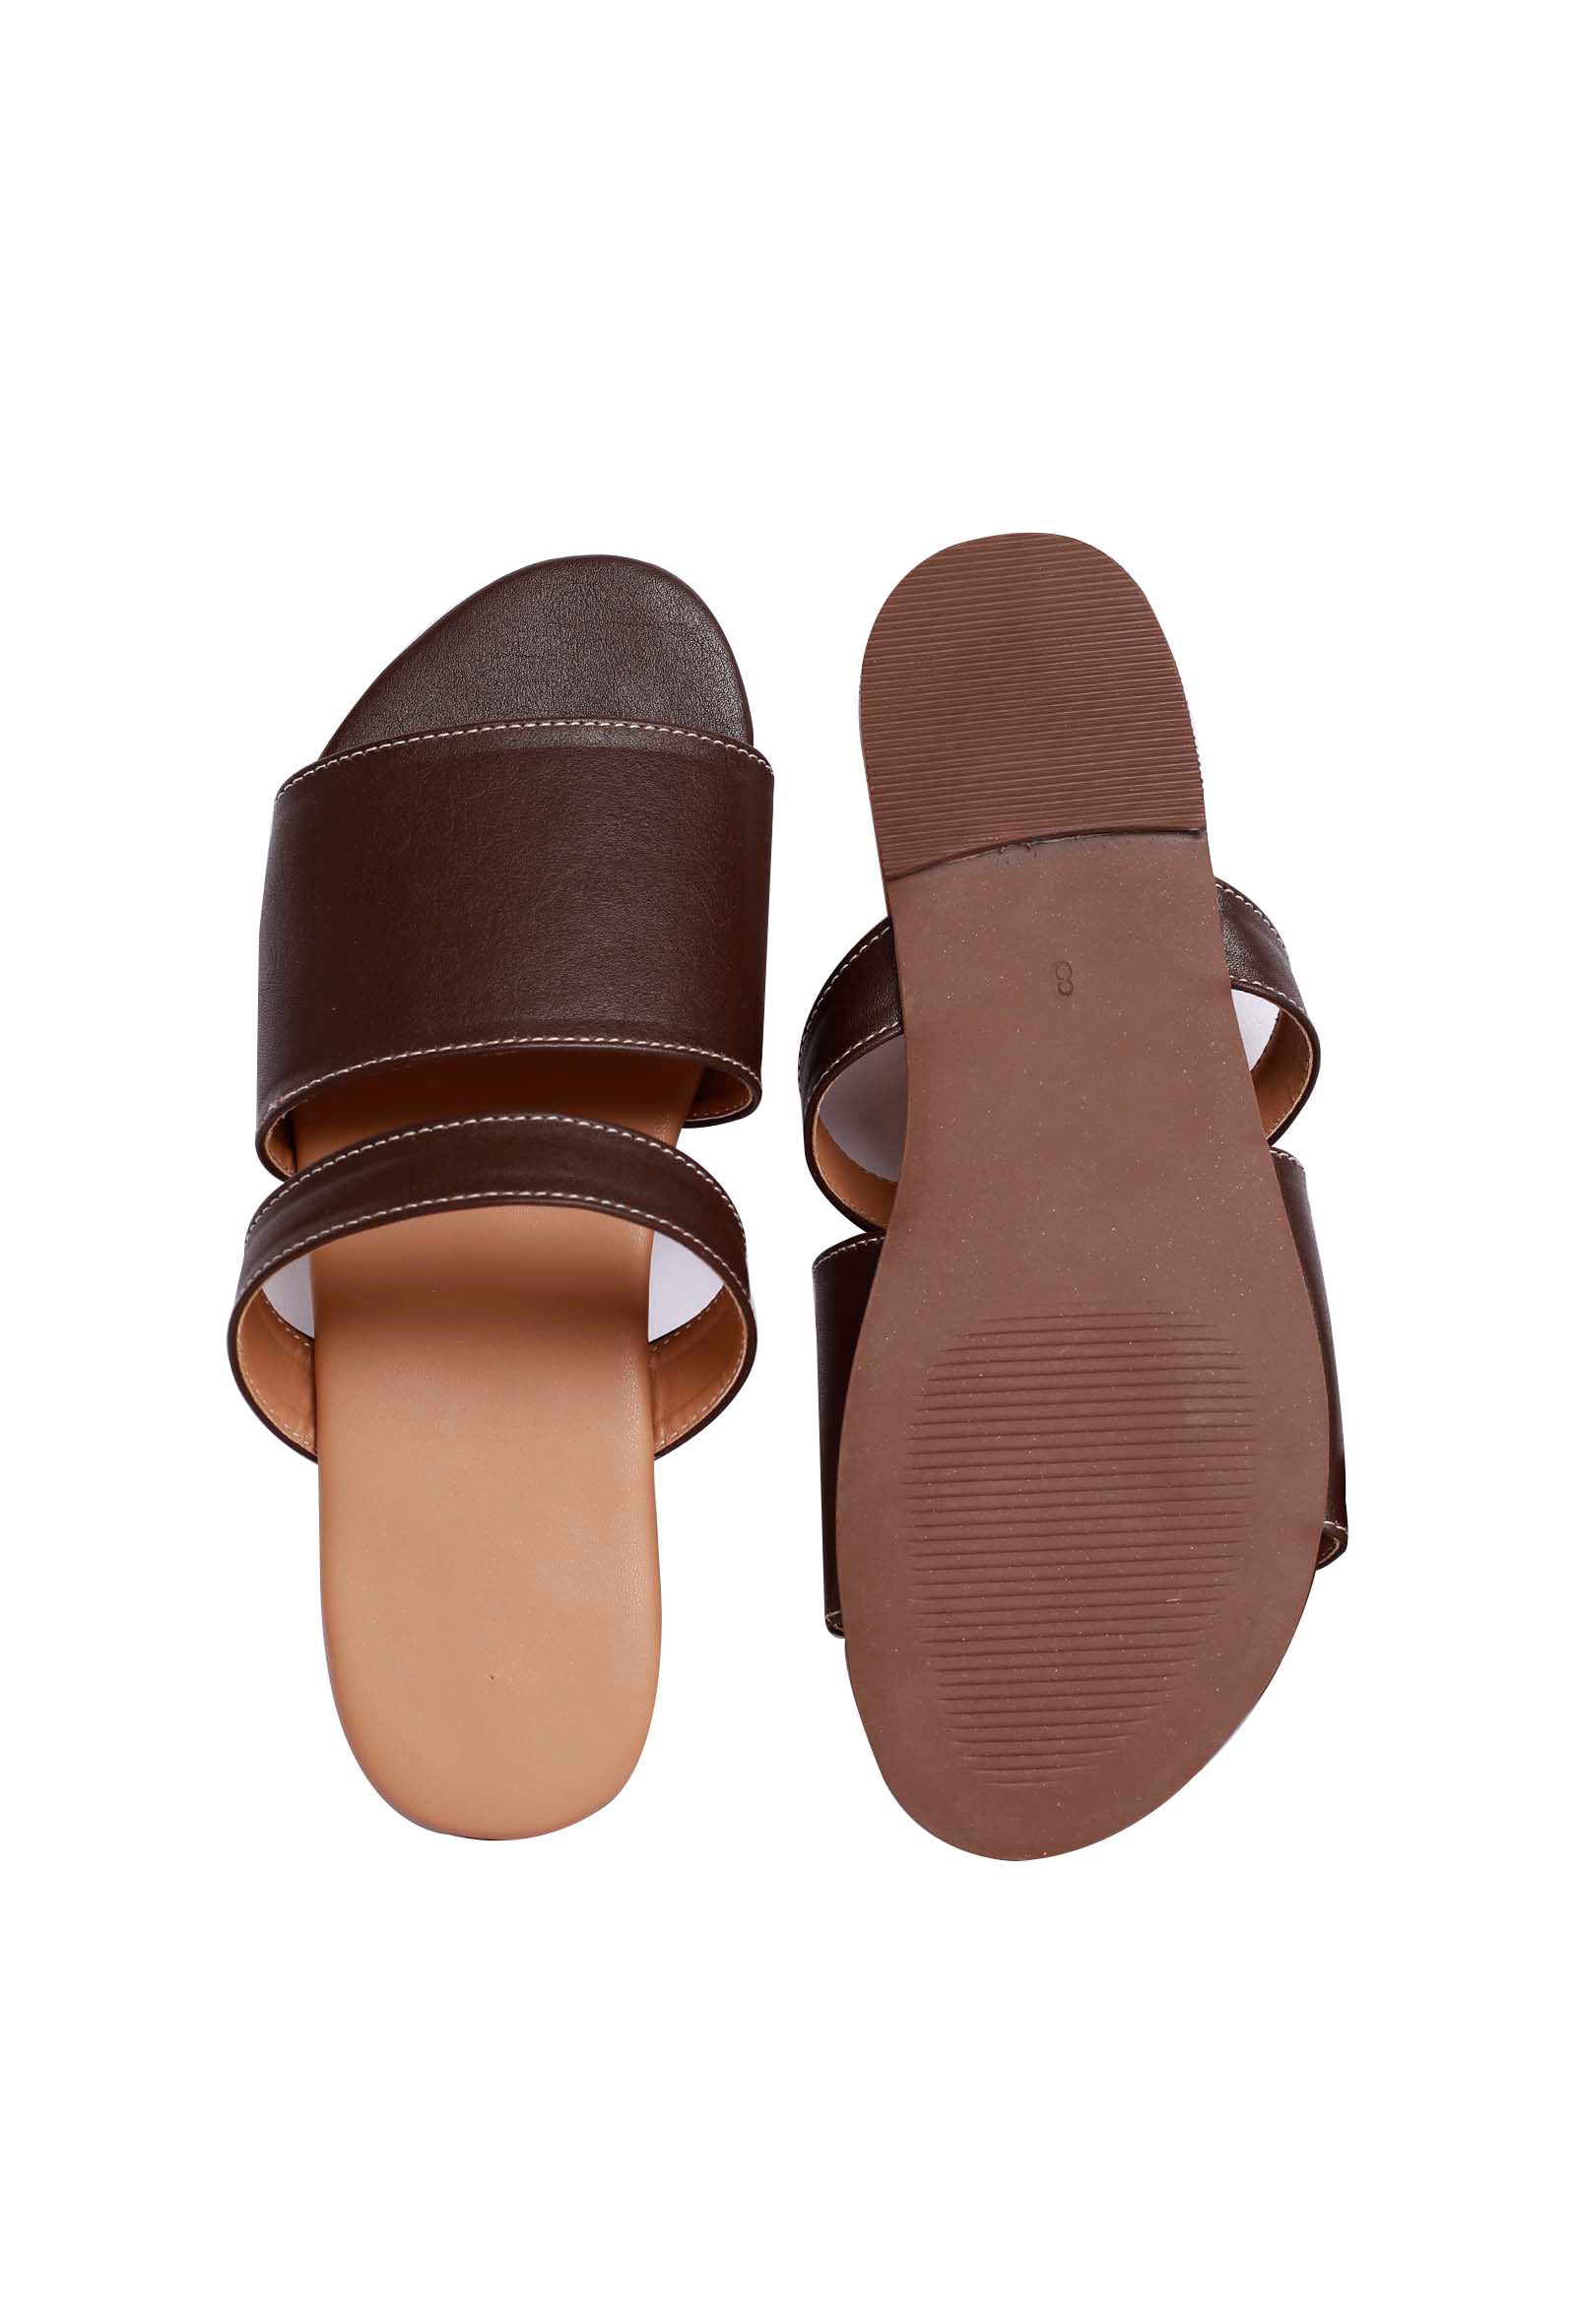 Tortilla Brown Cruelty Free Leather Sliders